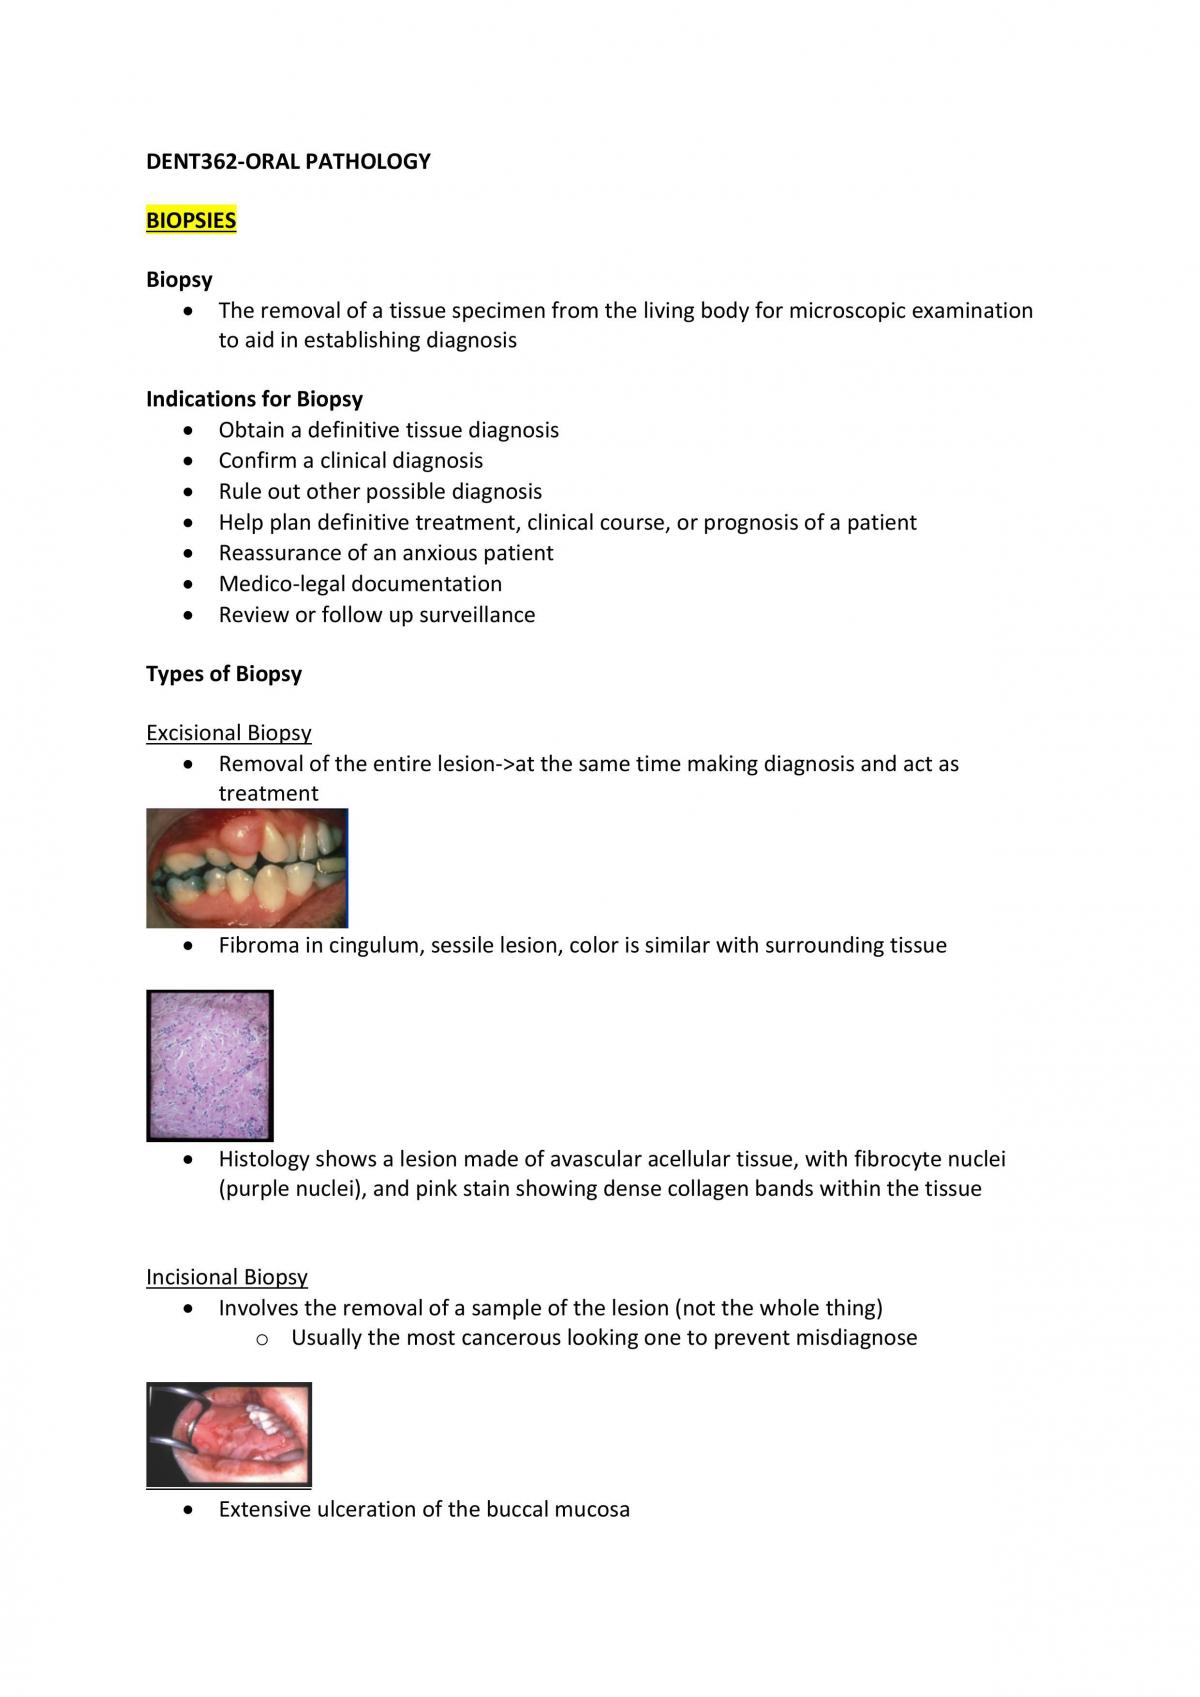 DENT362 Oral Pathology Complete Study Notes - Page 1